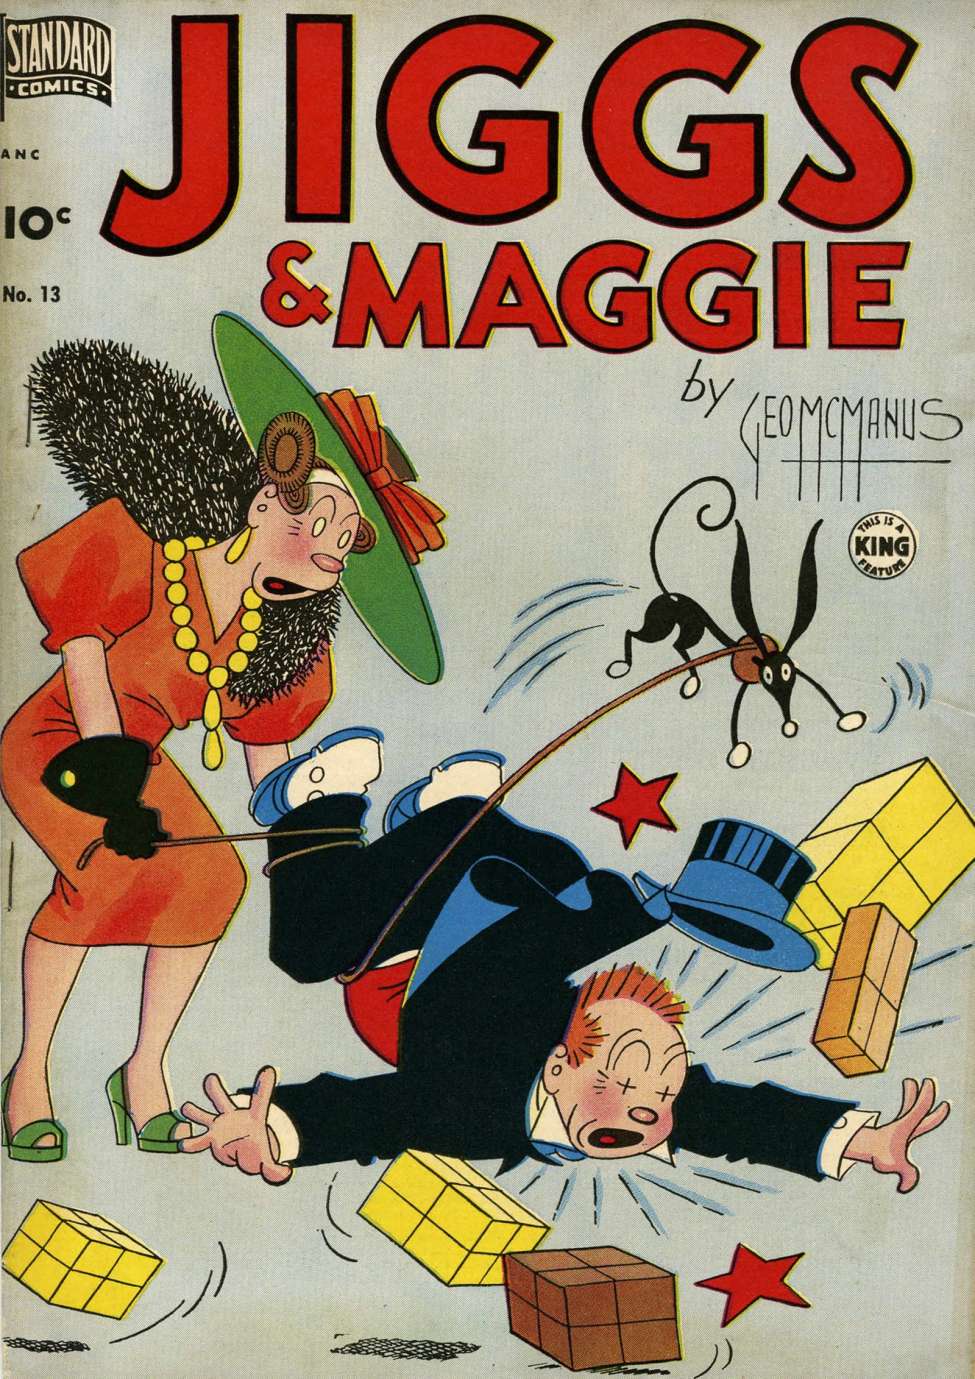 Book Cover For Jiggs & Maggie 13